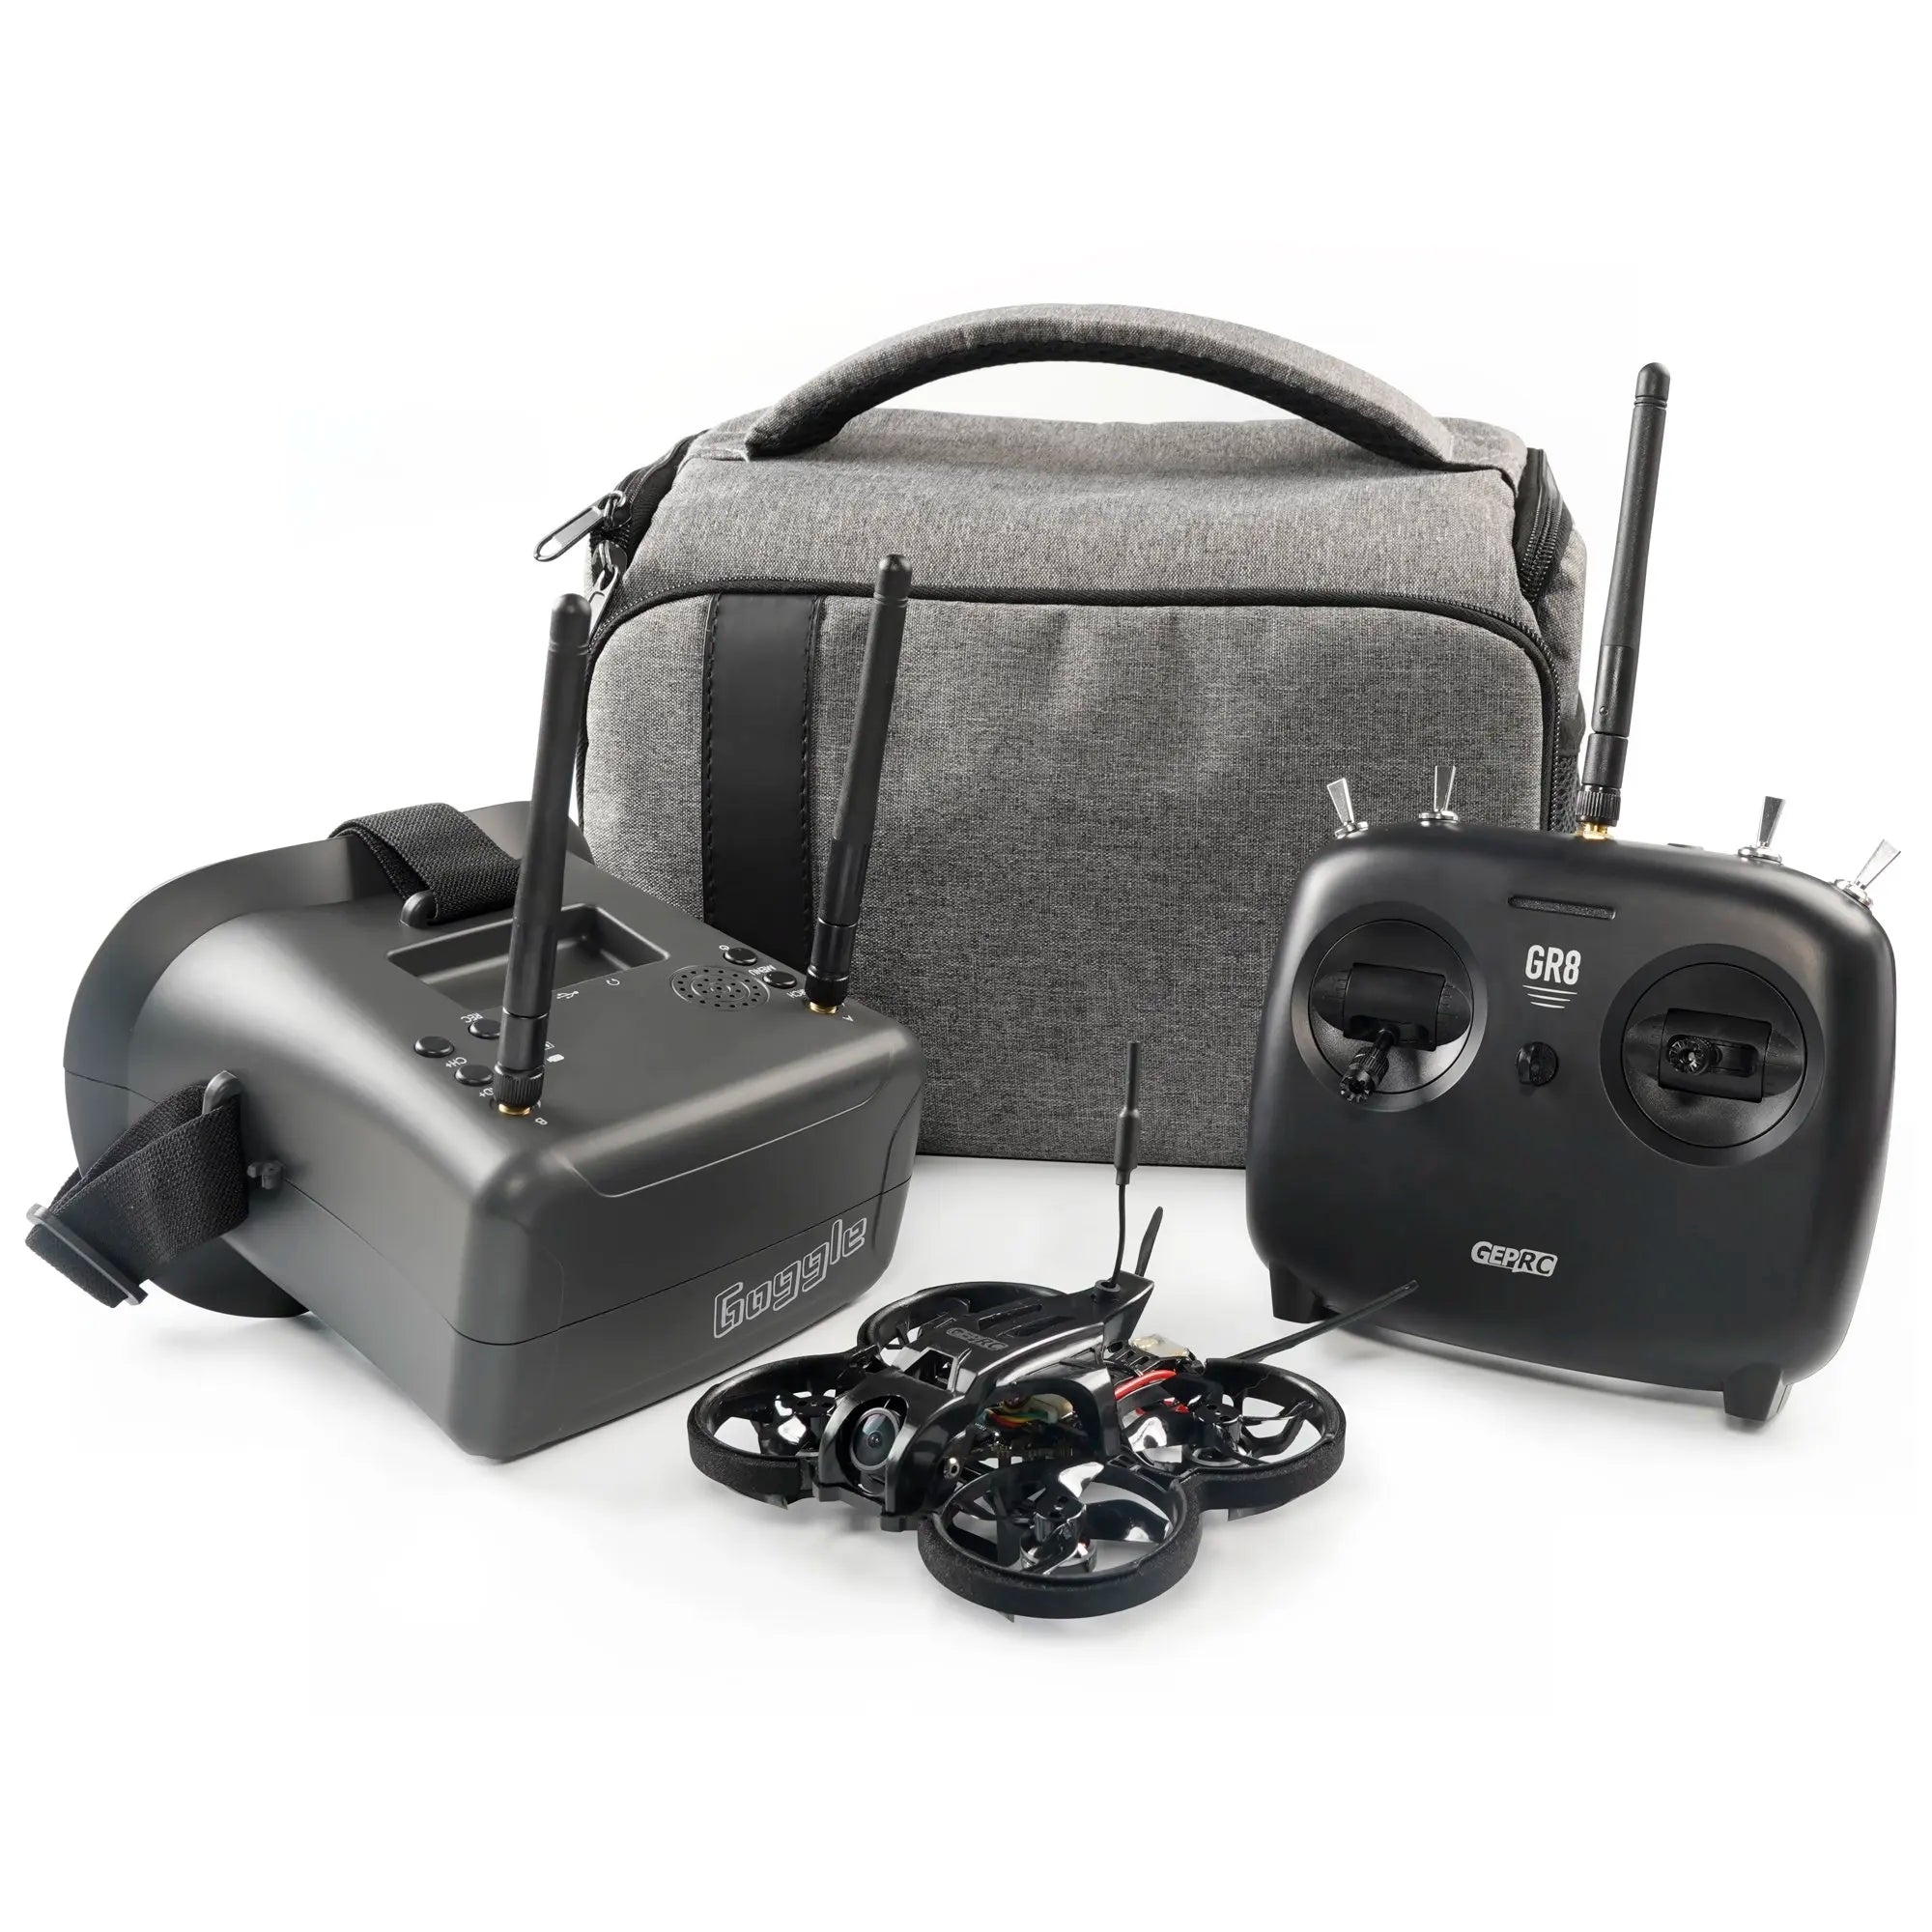 GEPRC TinyGO 4K FPV, it supports 8 channels and is specially designed for indoor and novices